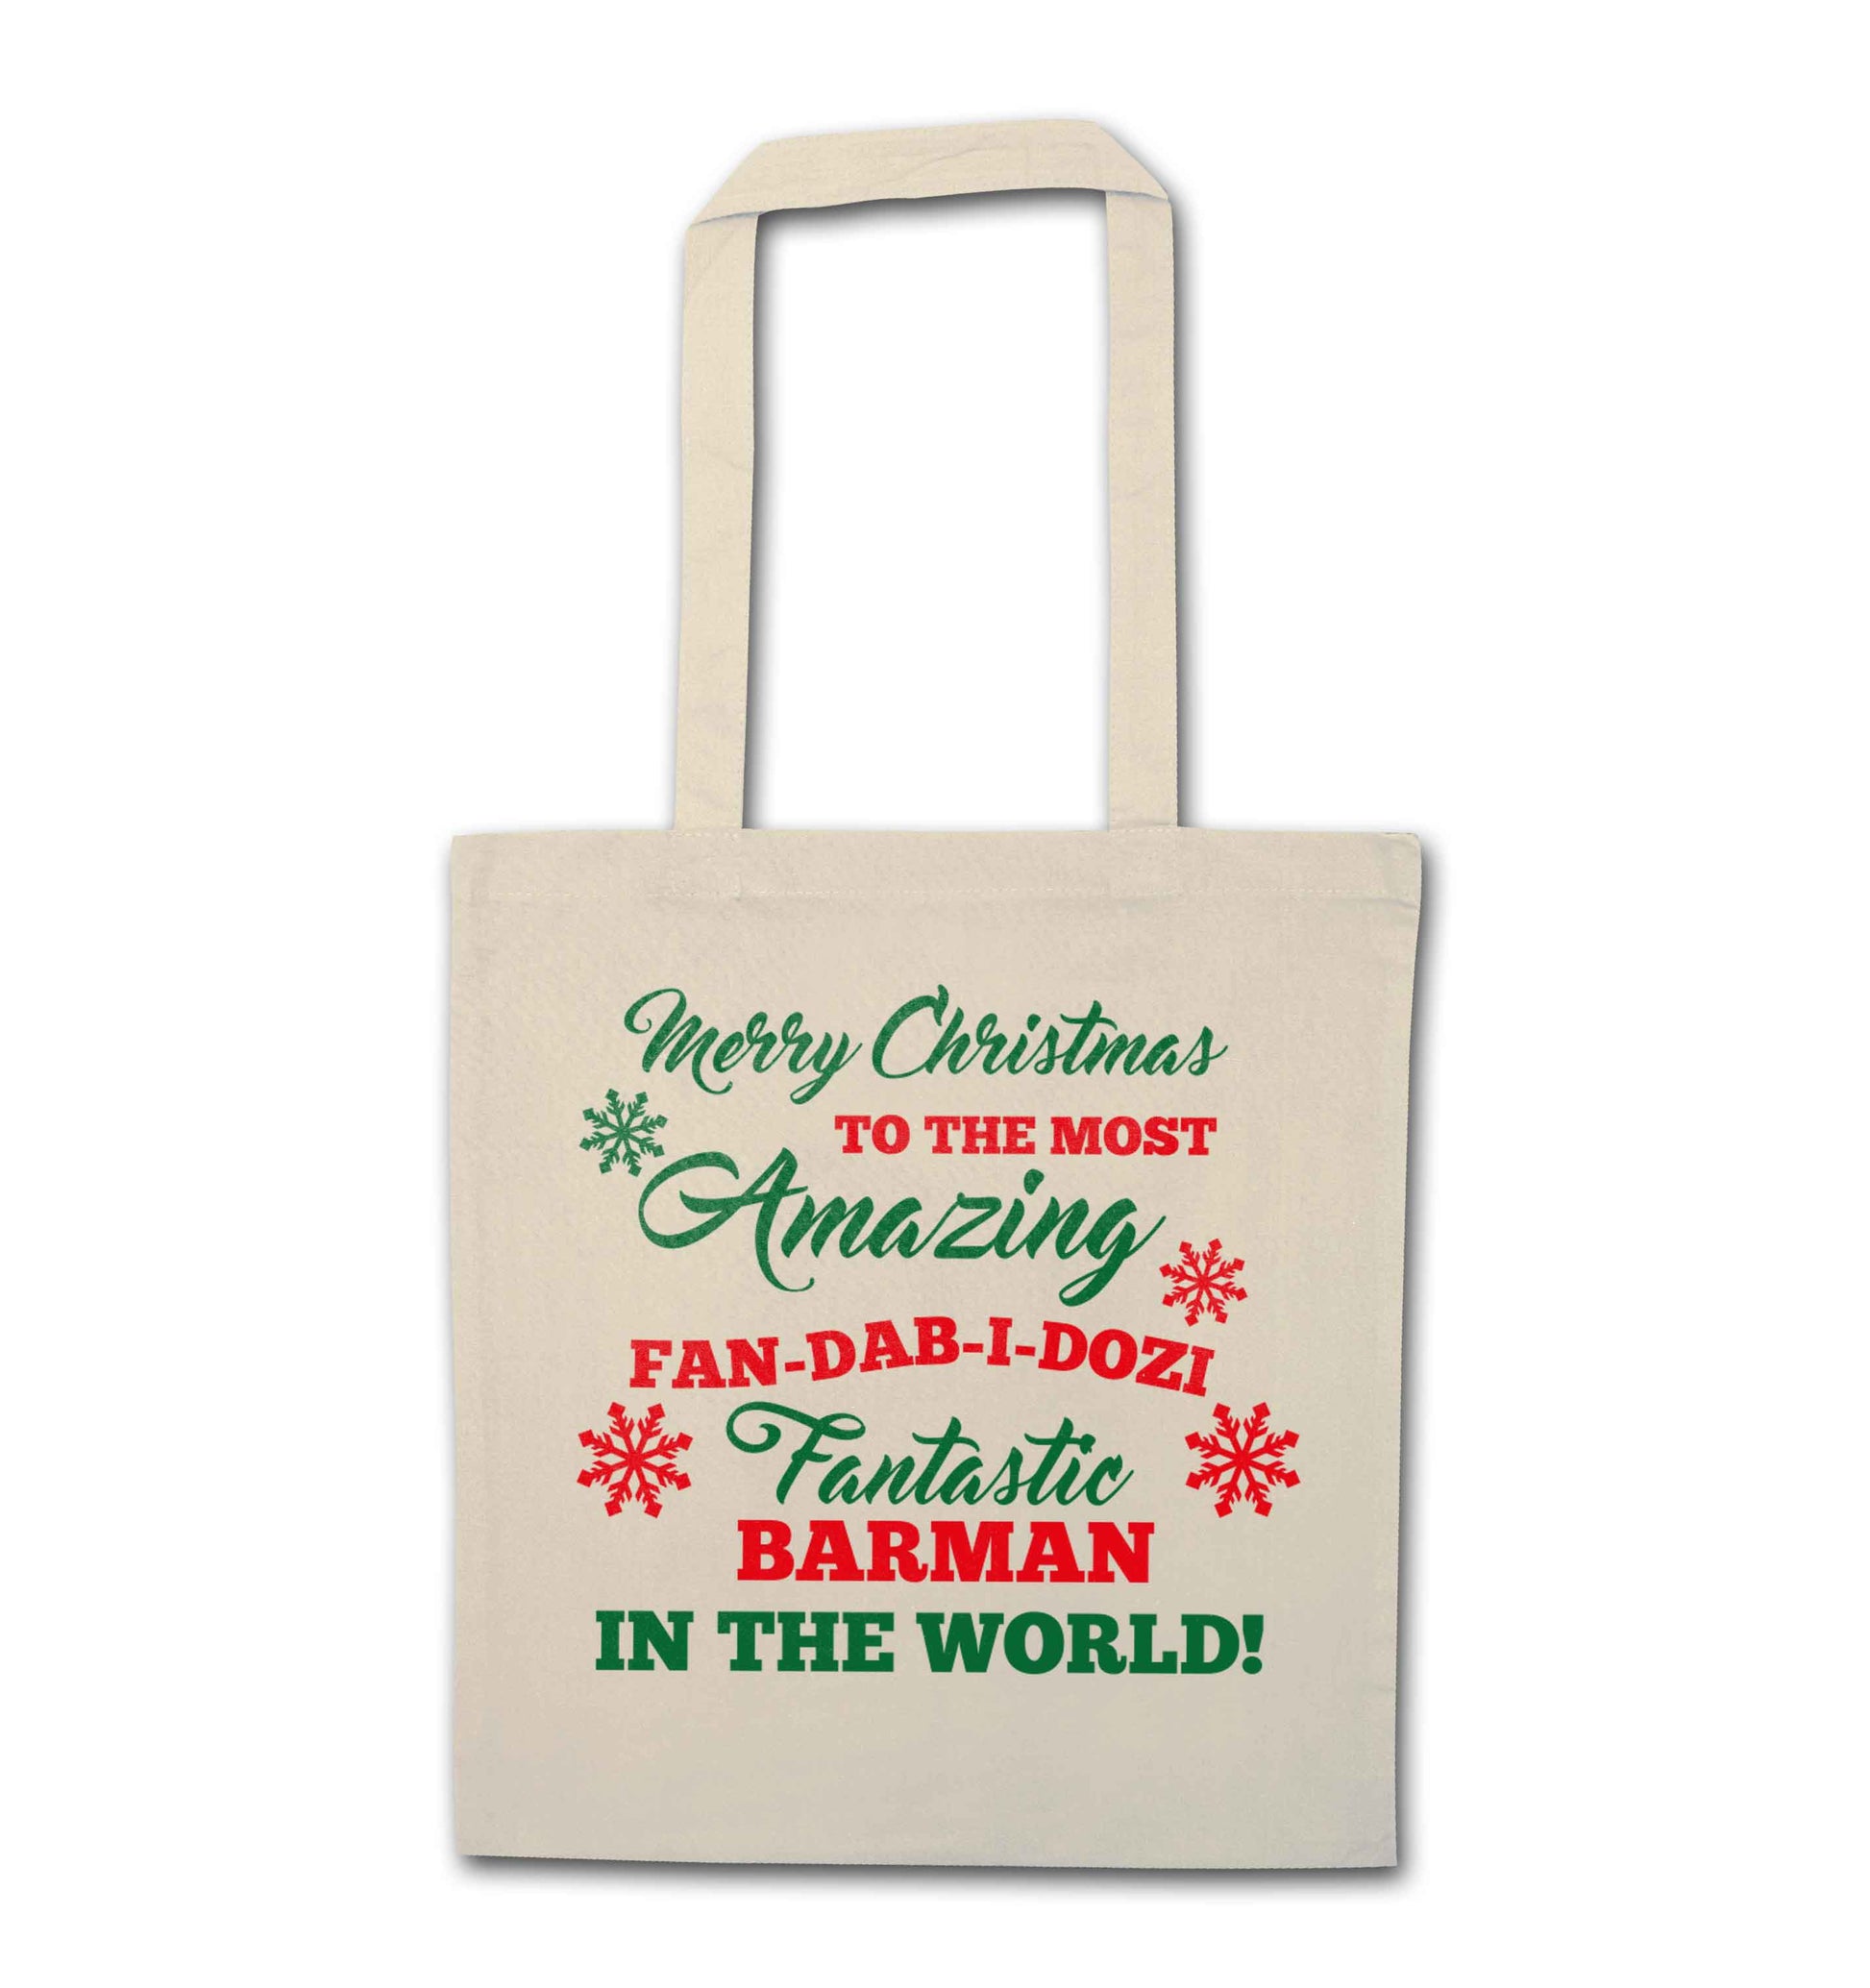 Merry Christmas to the most amazing barman in the world! natural tote bag